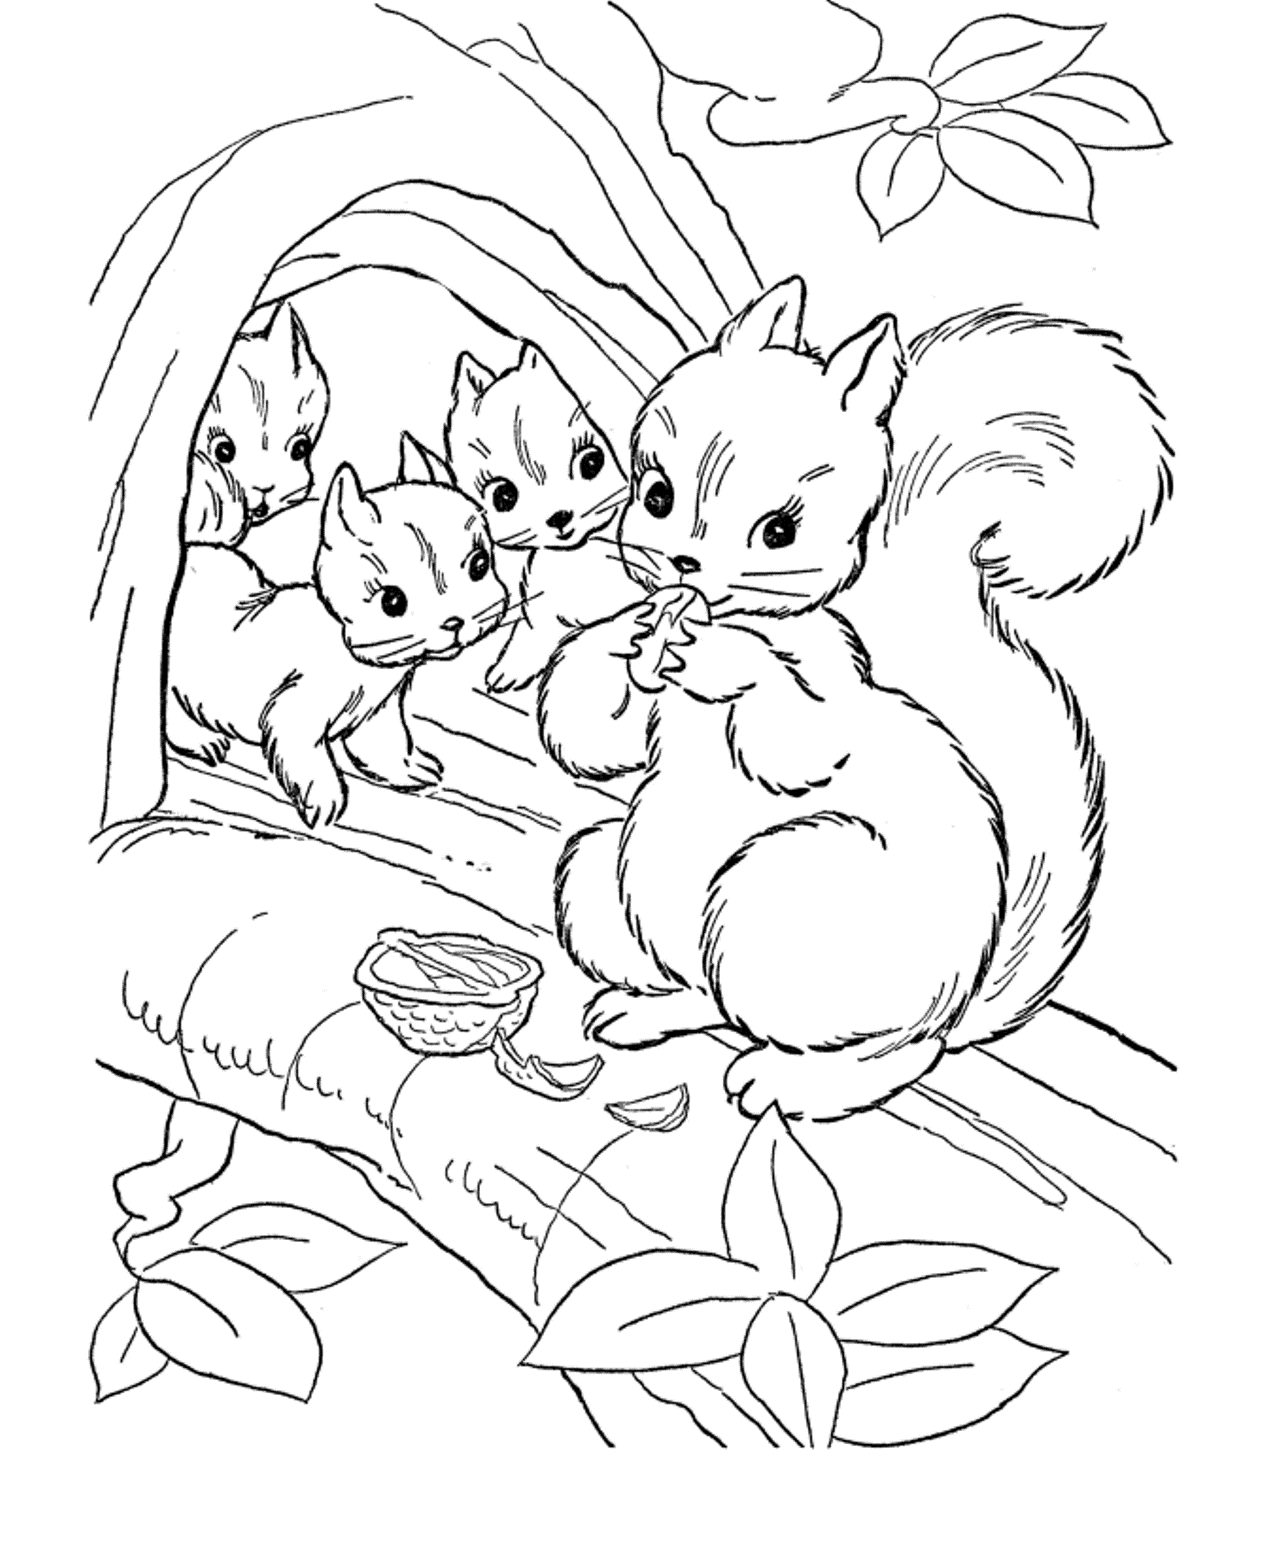 Squirrel Colouring Pictures : Squirrel Coloring Pages For Children ...